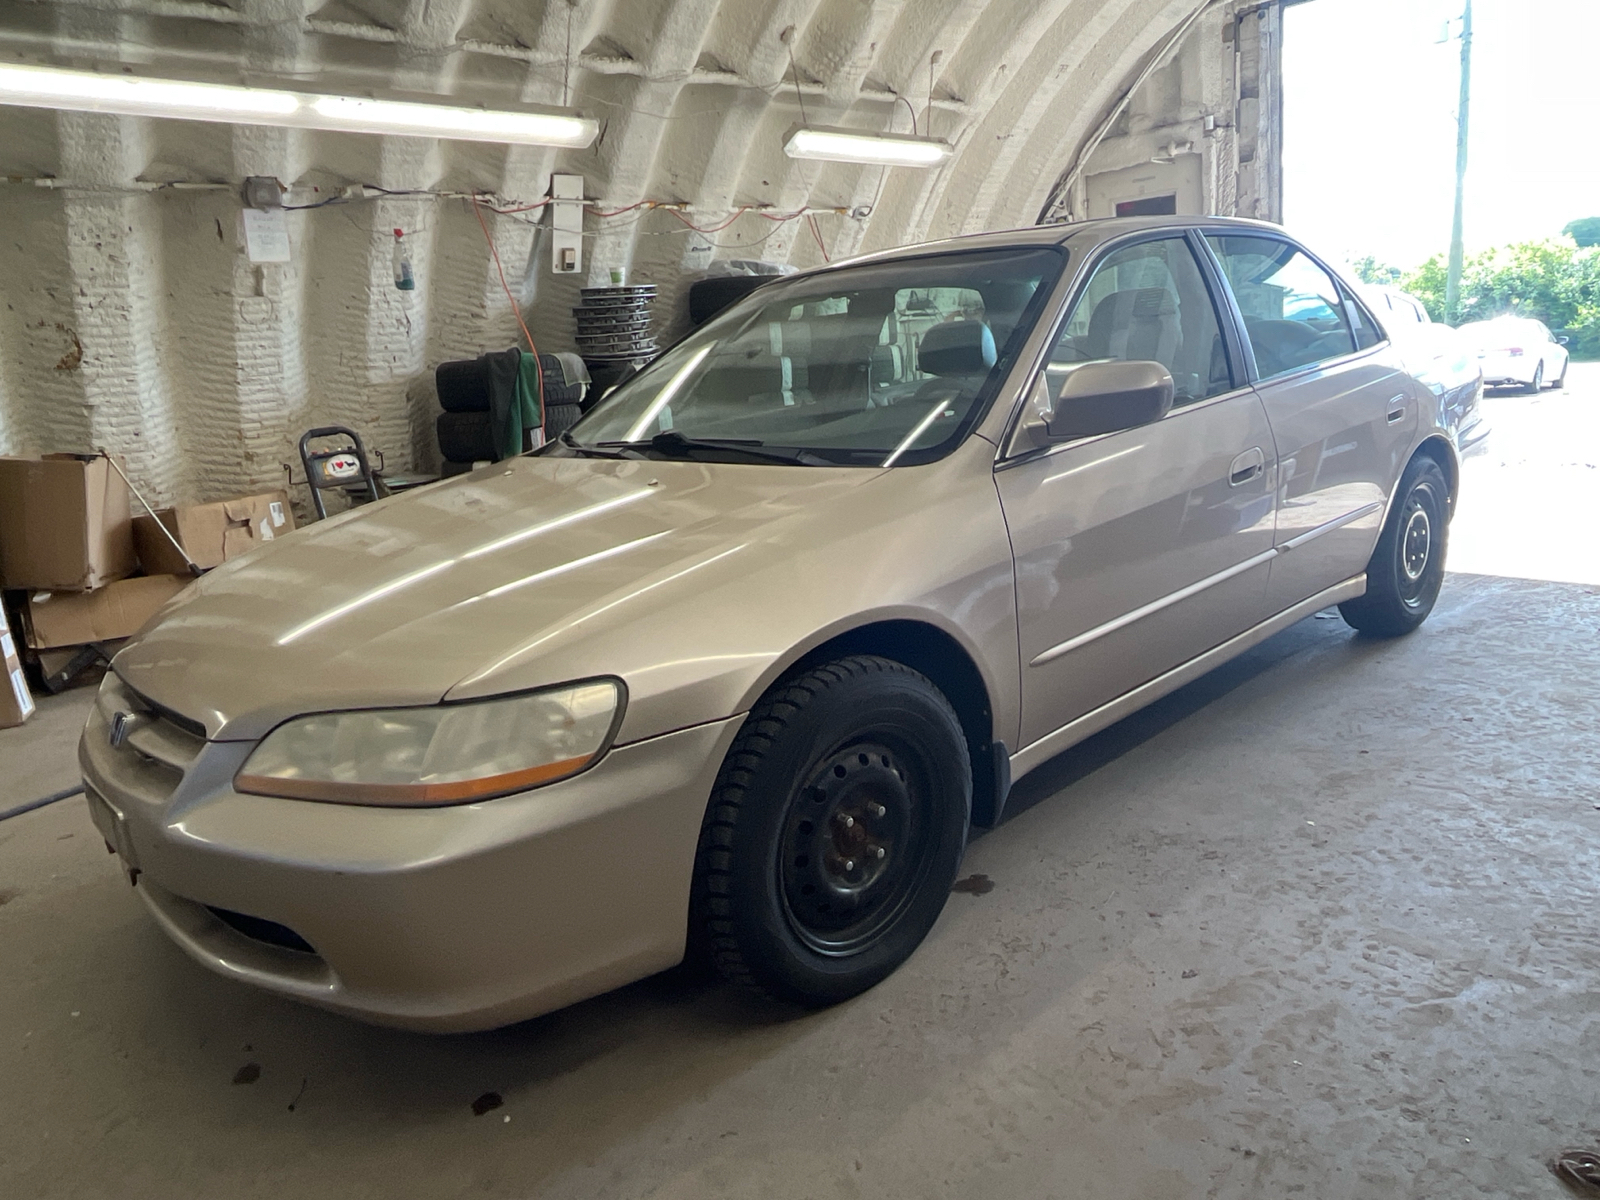 2000 Honda Accord ** AS-IS SALE *** YOU CERTIFY *** YOU SAVE!!! *** 